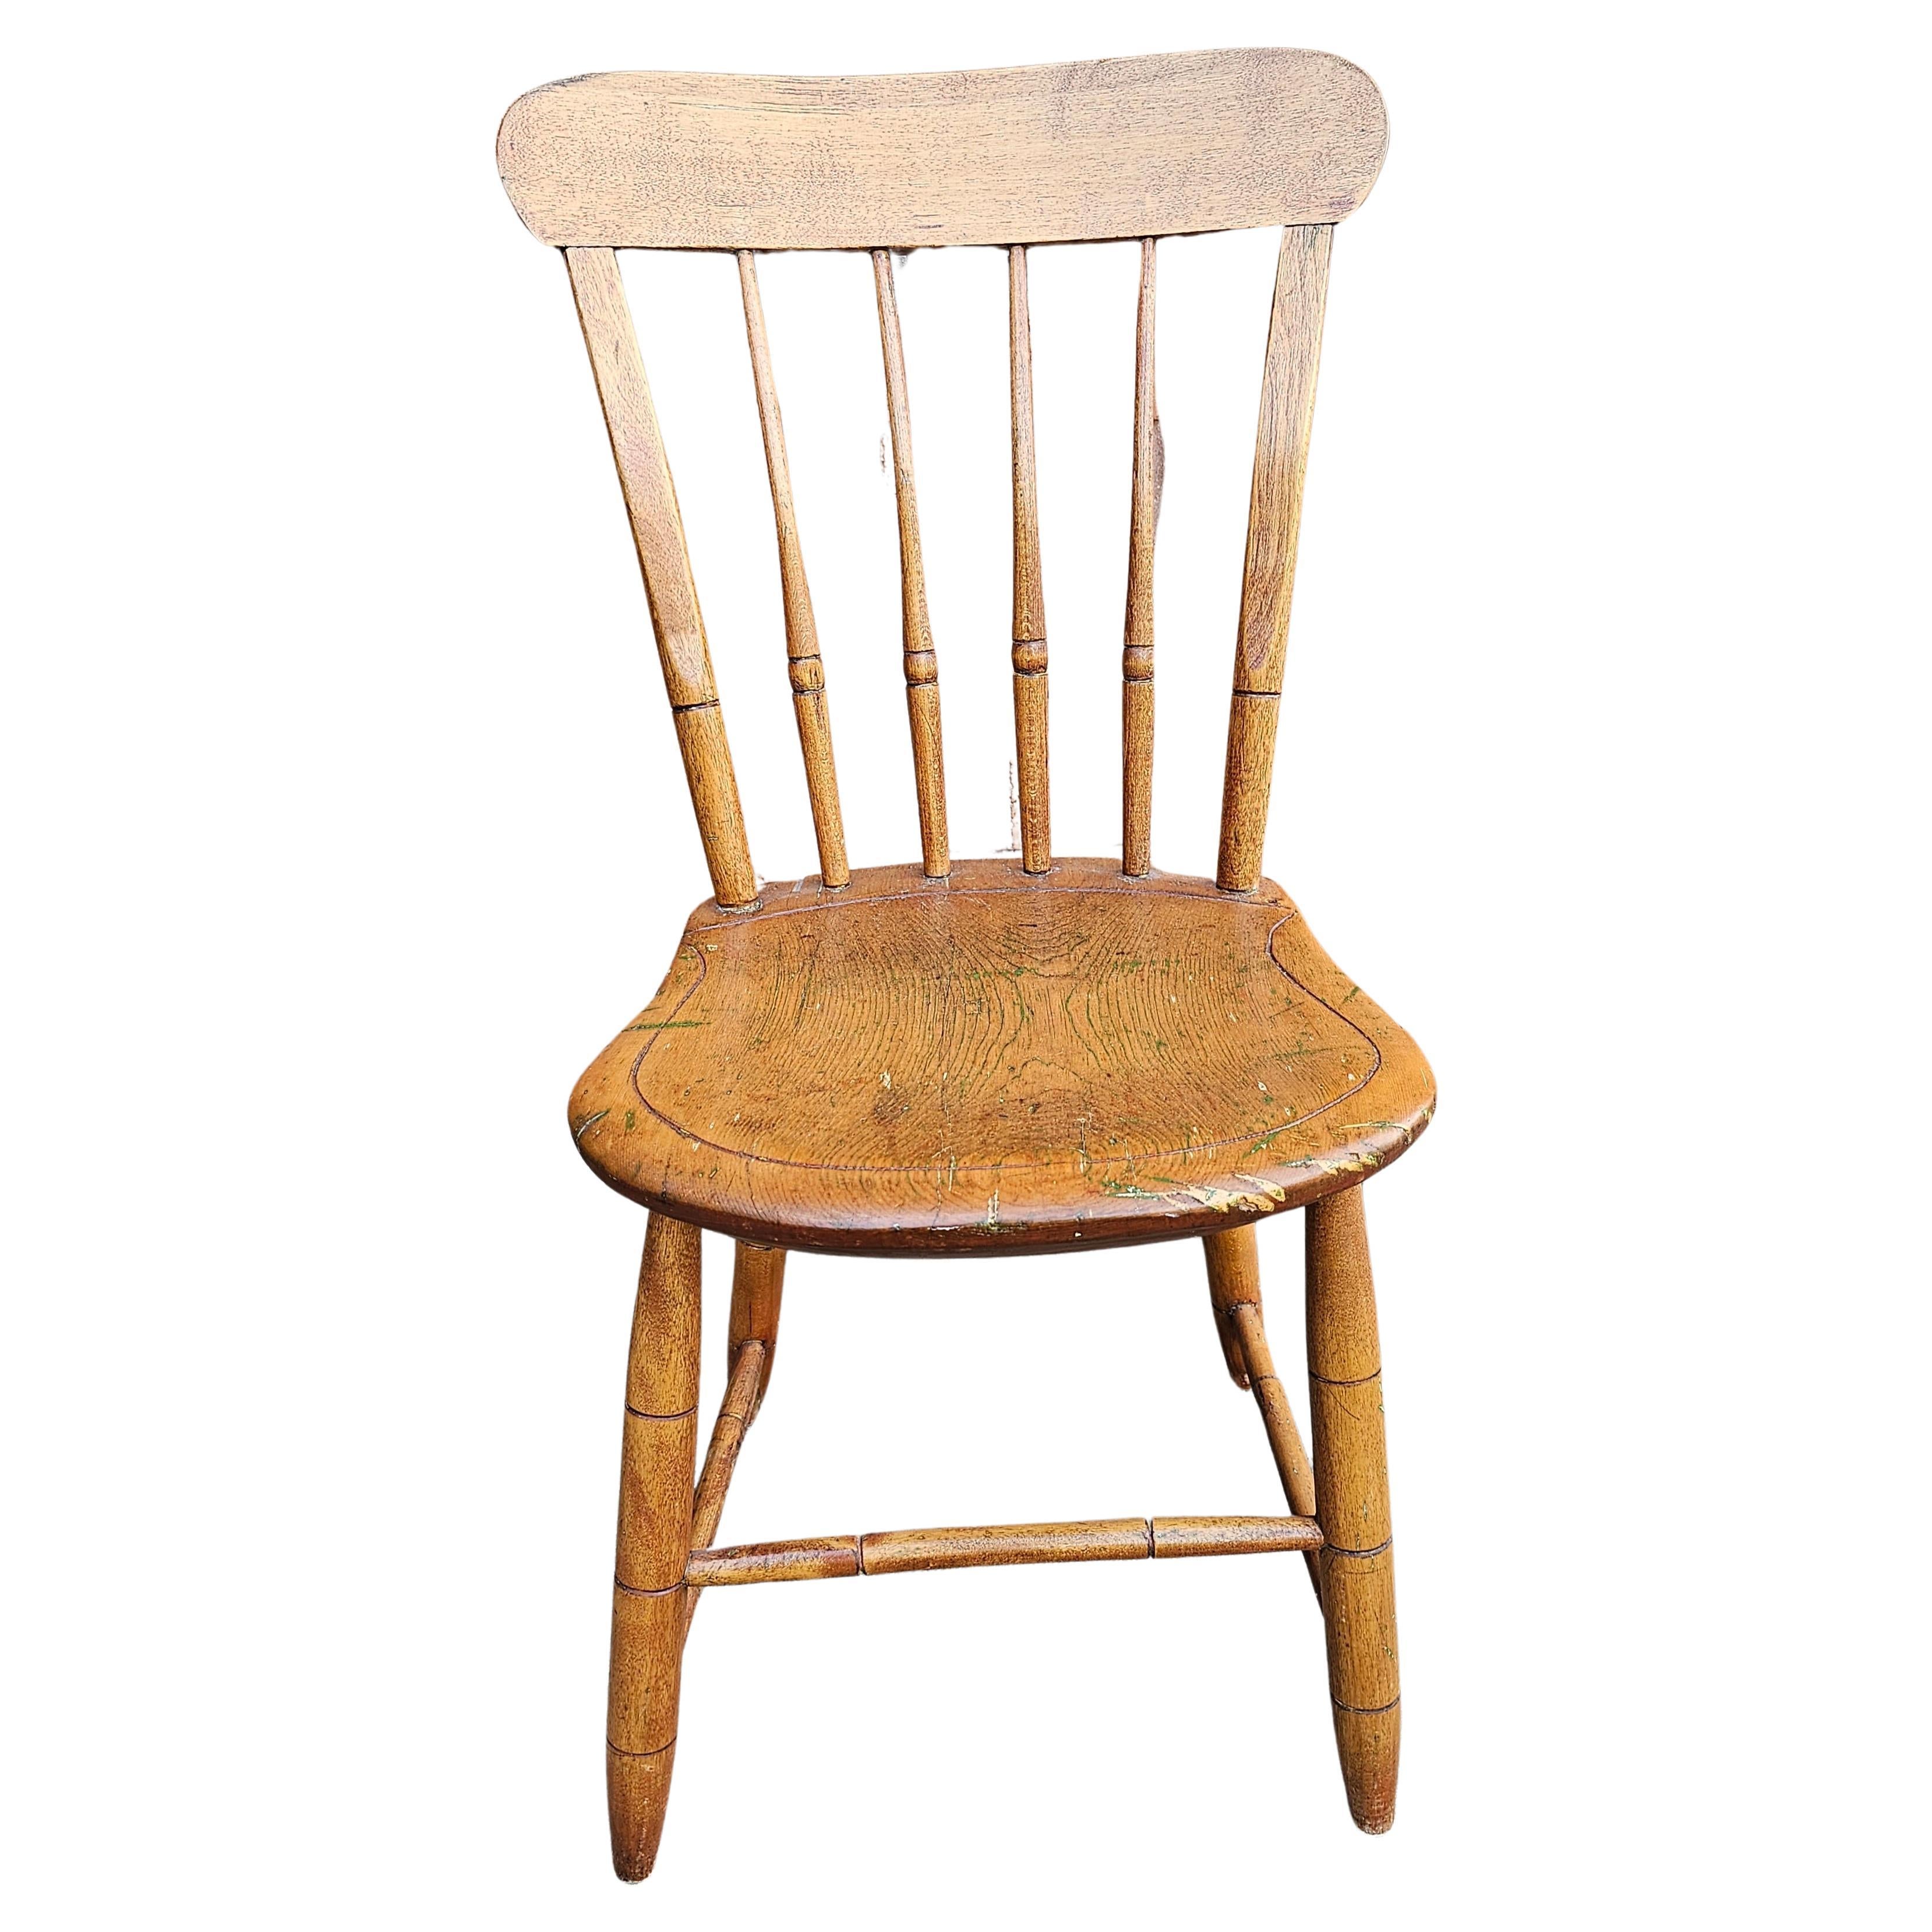 Early American Patinated Maple Plank  Side Chair, Circa Early 20th Century